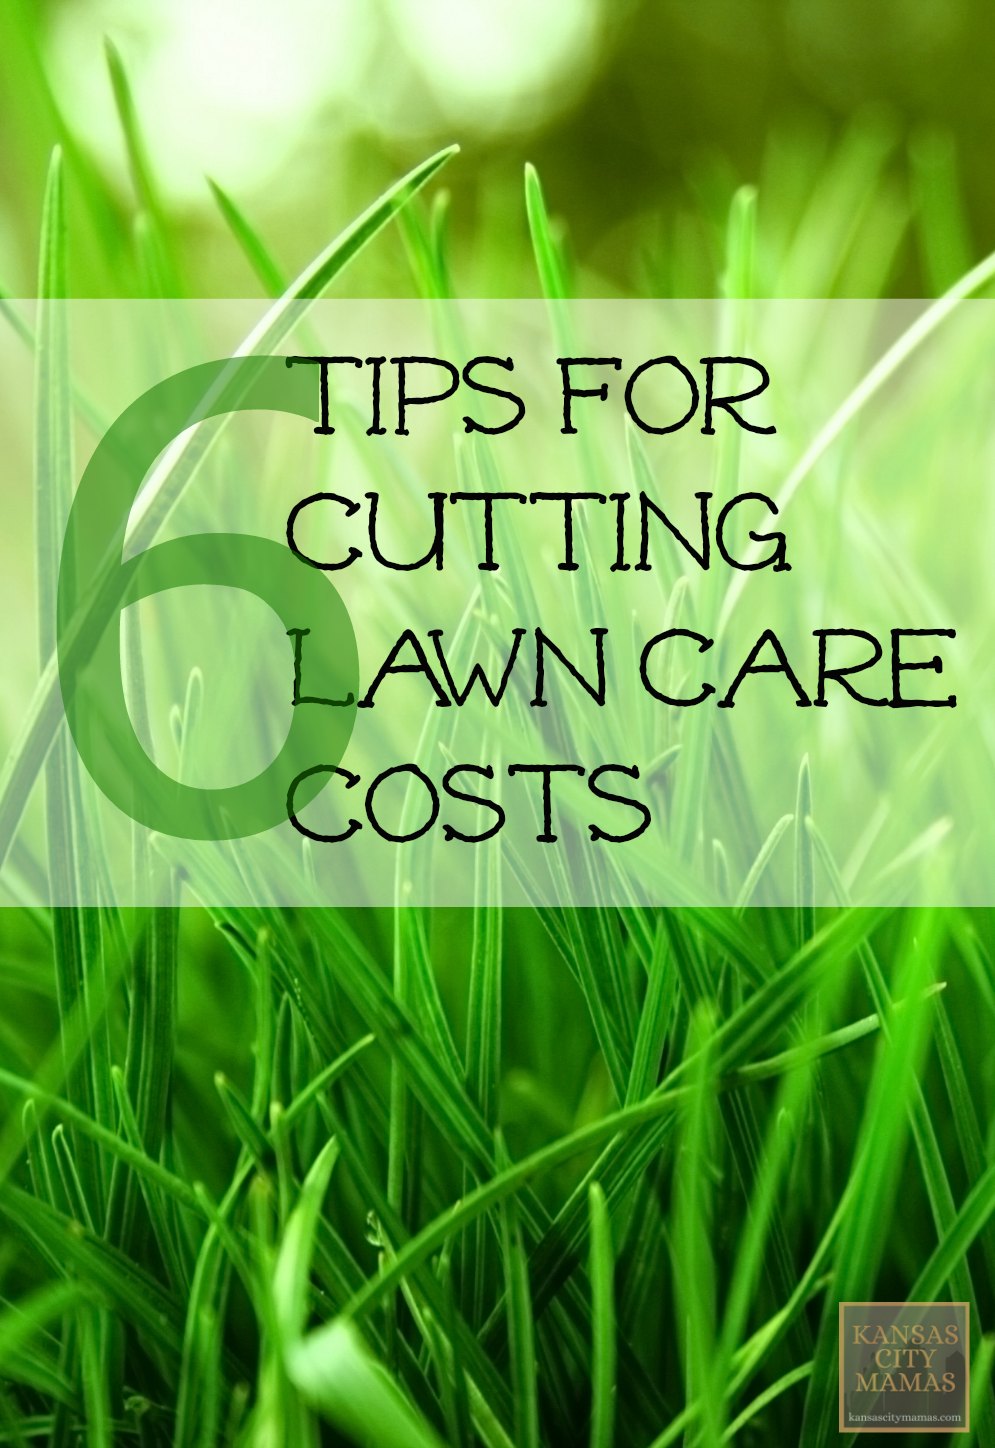 6 Tips For Cutting Lawn Care Costs